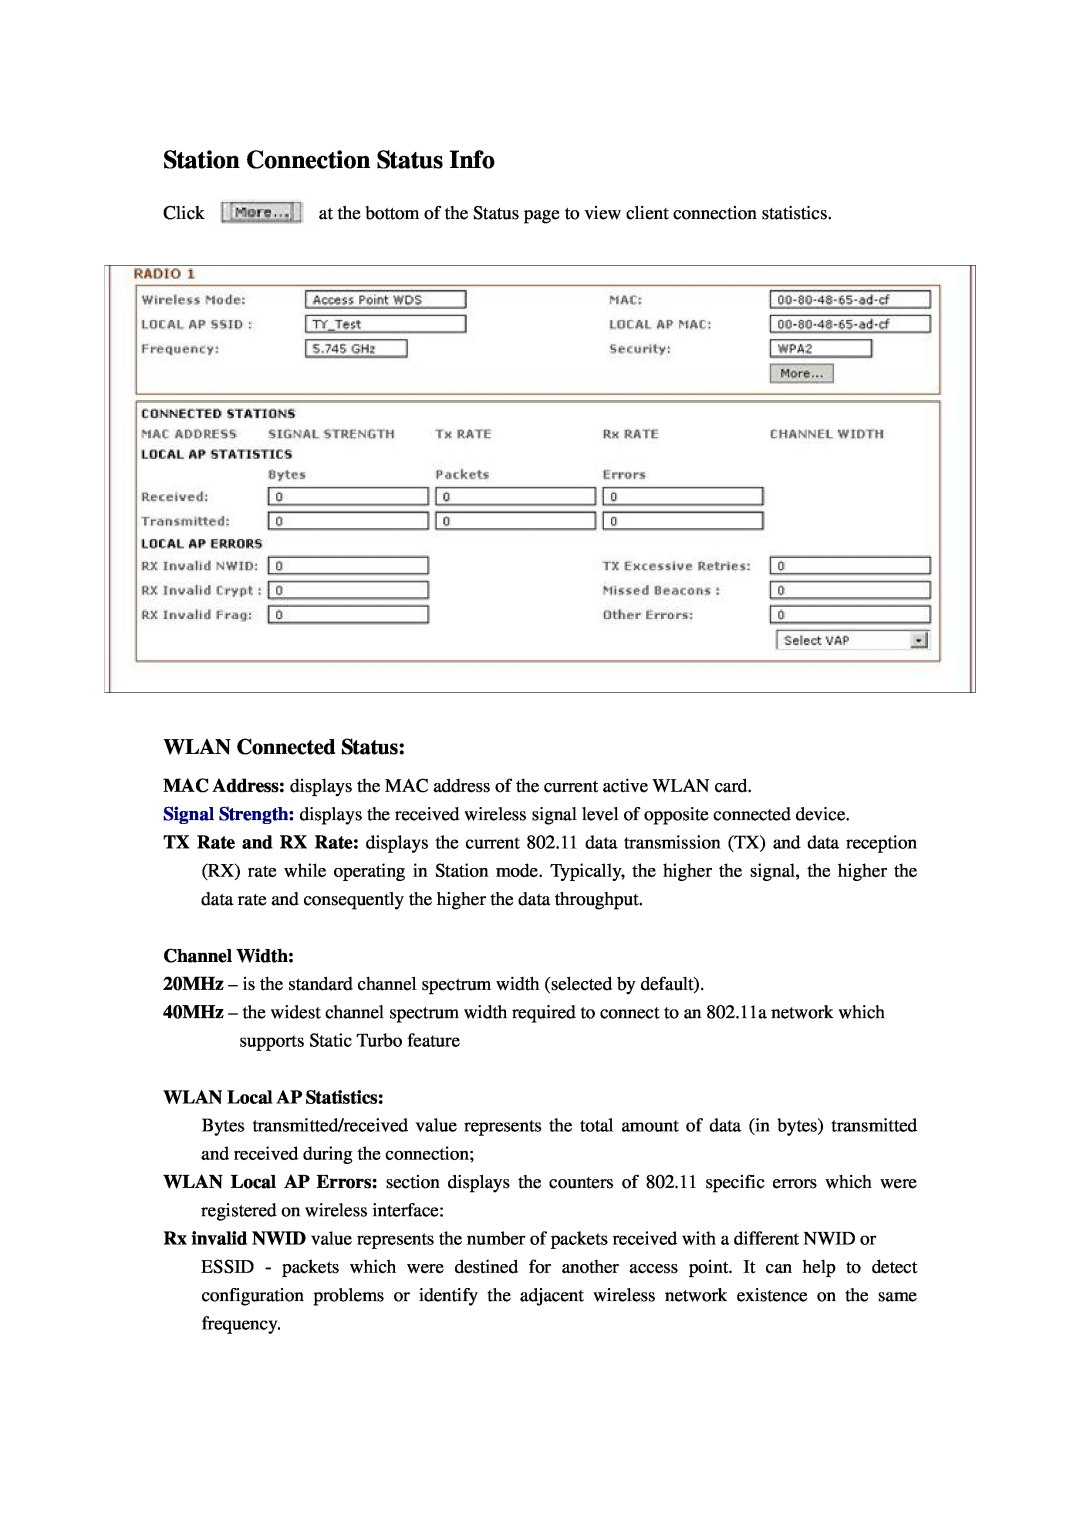 Compex Systems 802.11N Station Connection Status Info, WLAN Connected Status, Channel Width, WLAN Local AP Statistics 